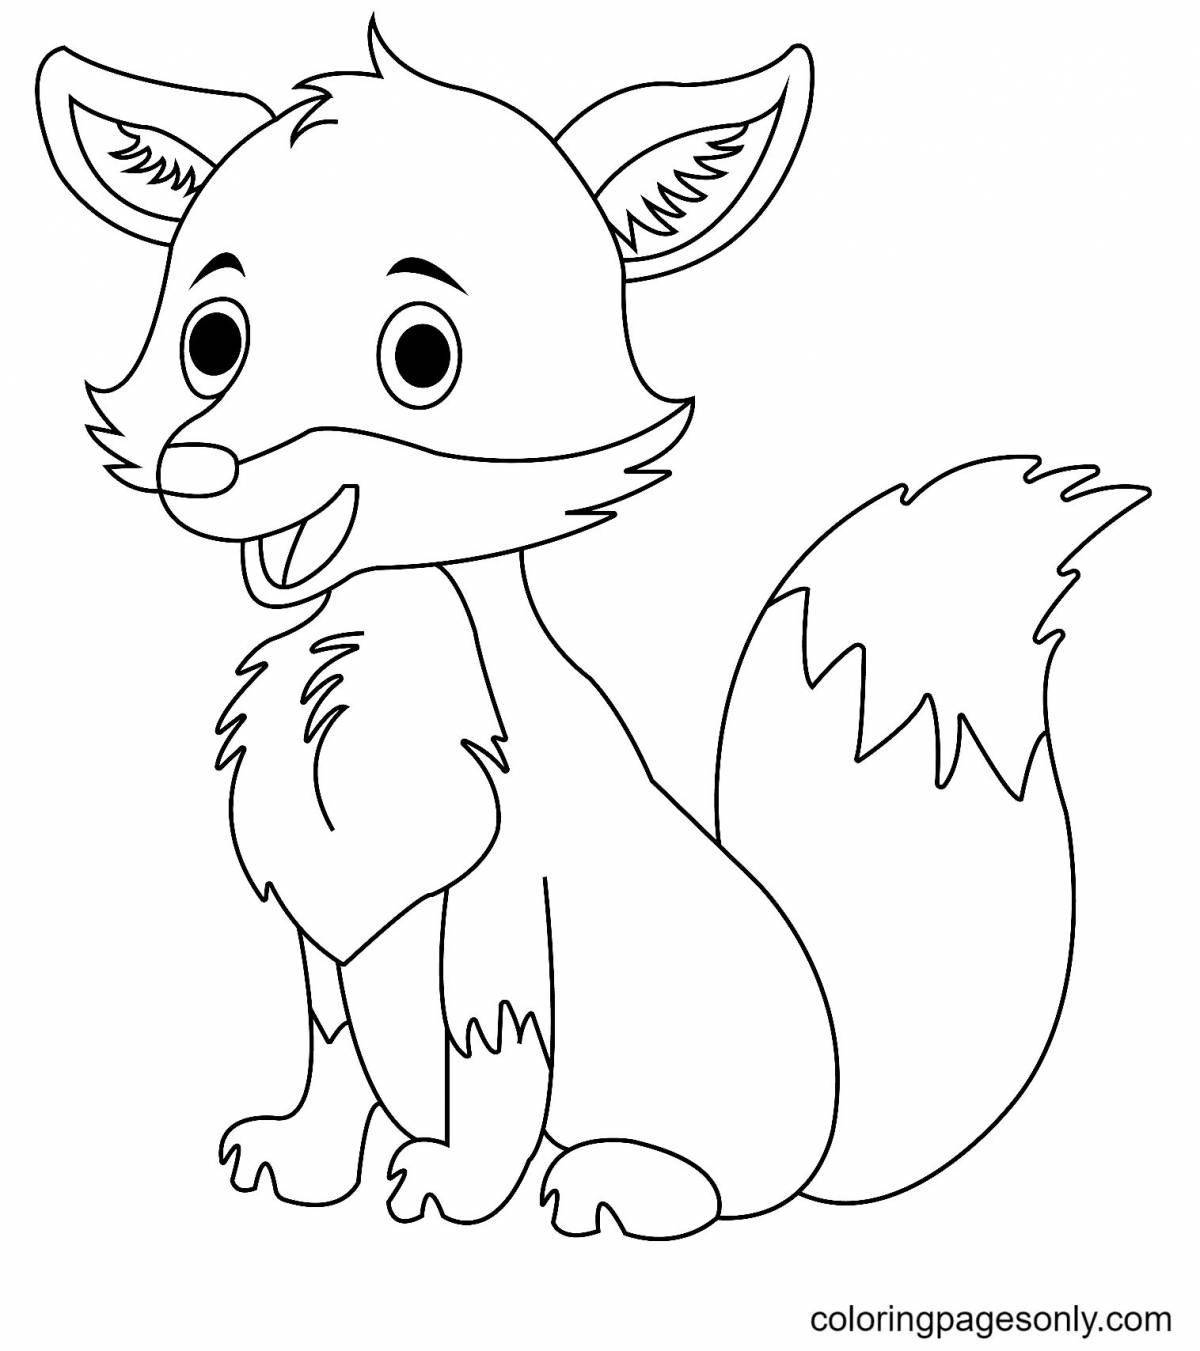 Adorable fox coloring book for children 2-3 years old